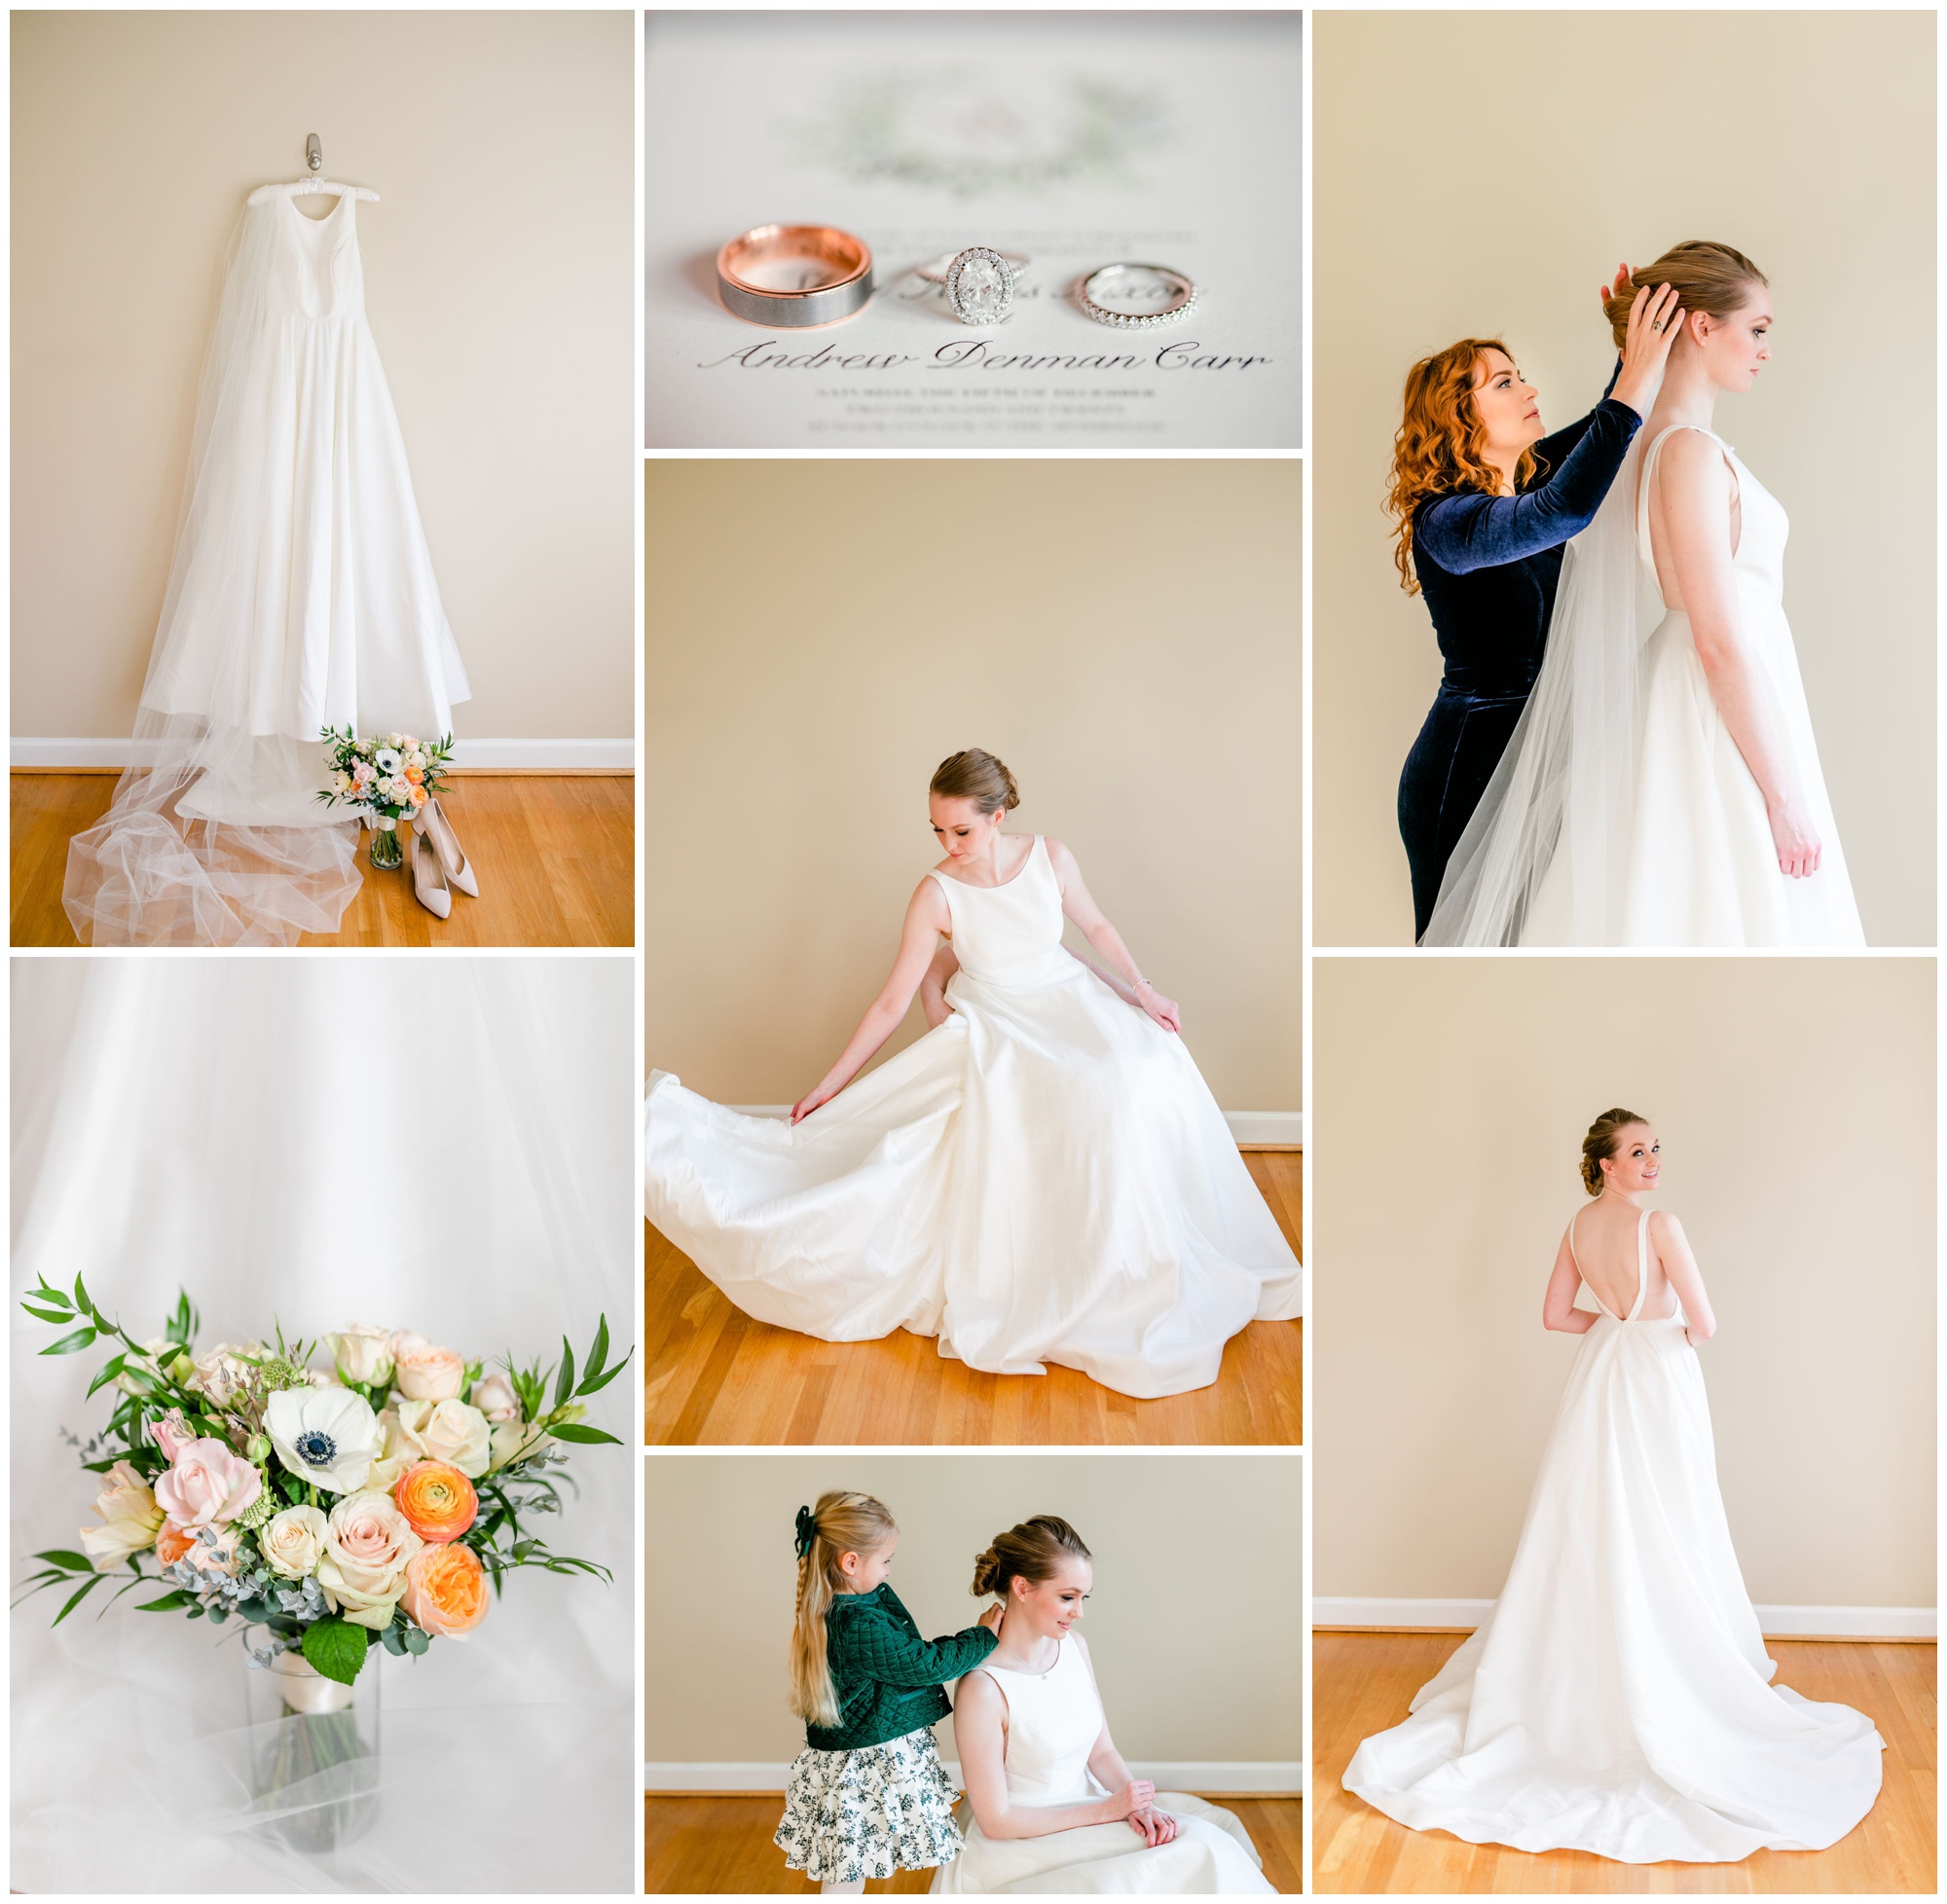 how to prepare your home for photos, wedding photography tips, tips for engaged couples, elopement tips, small wedding tips, in-home portraits, in-home photos, D.C. wedding photographer, Virginia wedding photographer, Baltimore wedding photographer, Rachel E.H. Photography, wedding dress on hanger, white and orange bouquet, green flower girl dress, rose gold wedding band